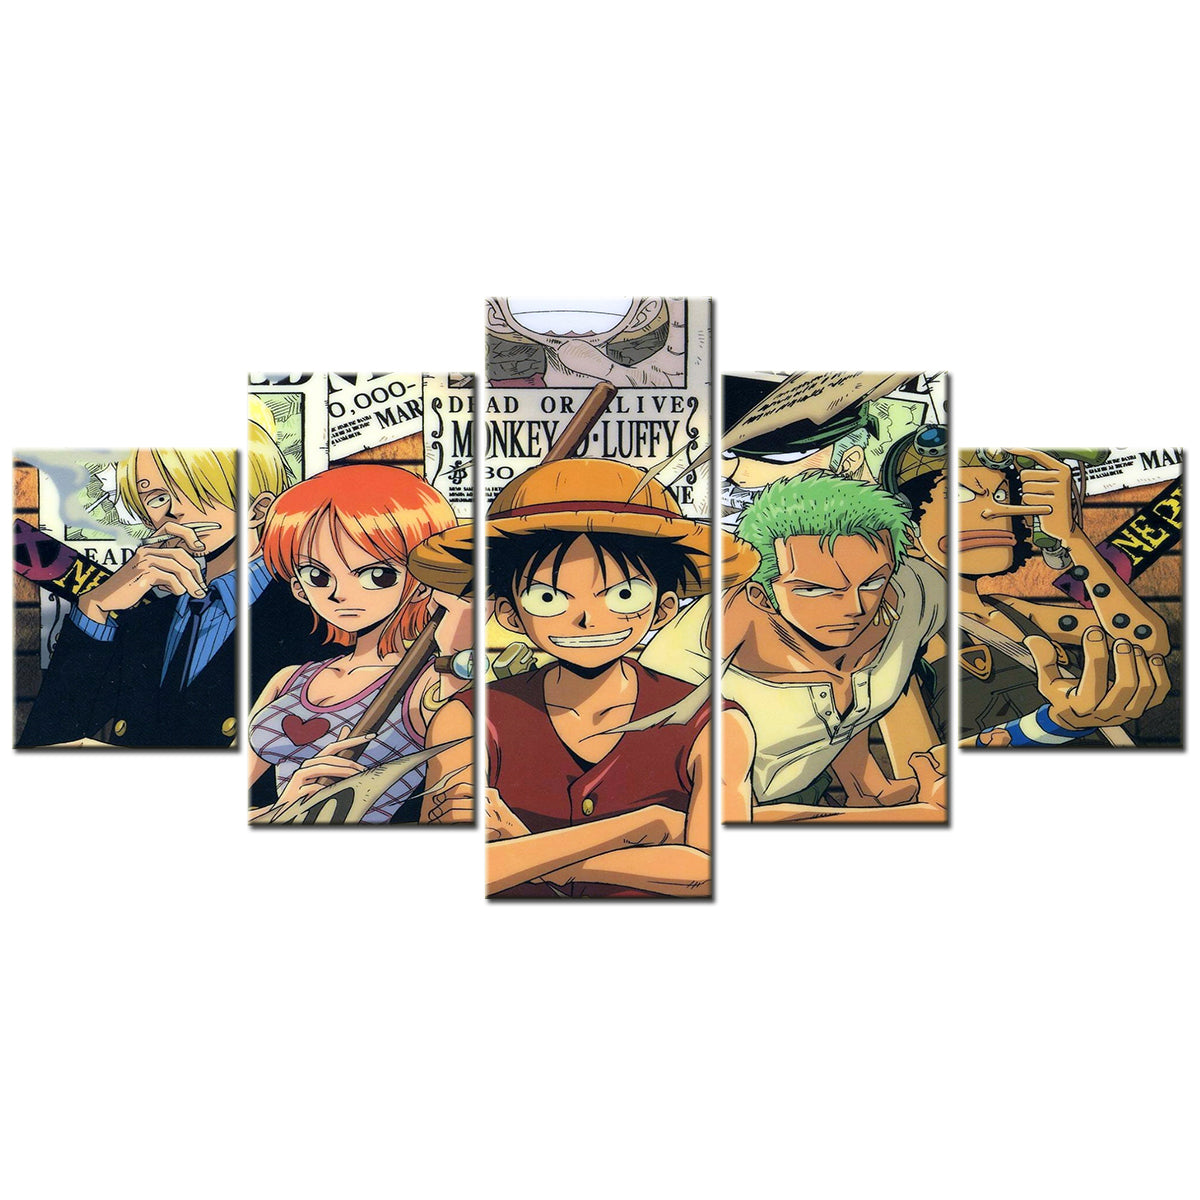 One Piece - 5 Pieces Wall Art - Monkey D. Luffy - Roronoa Zoro - Sanji - Usopp - Nami - Printed Wall Pictures Home Decor - One Piece Poster - One Piece Canvas